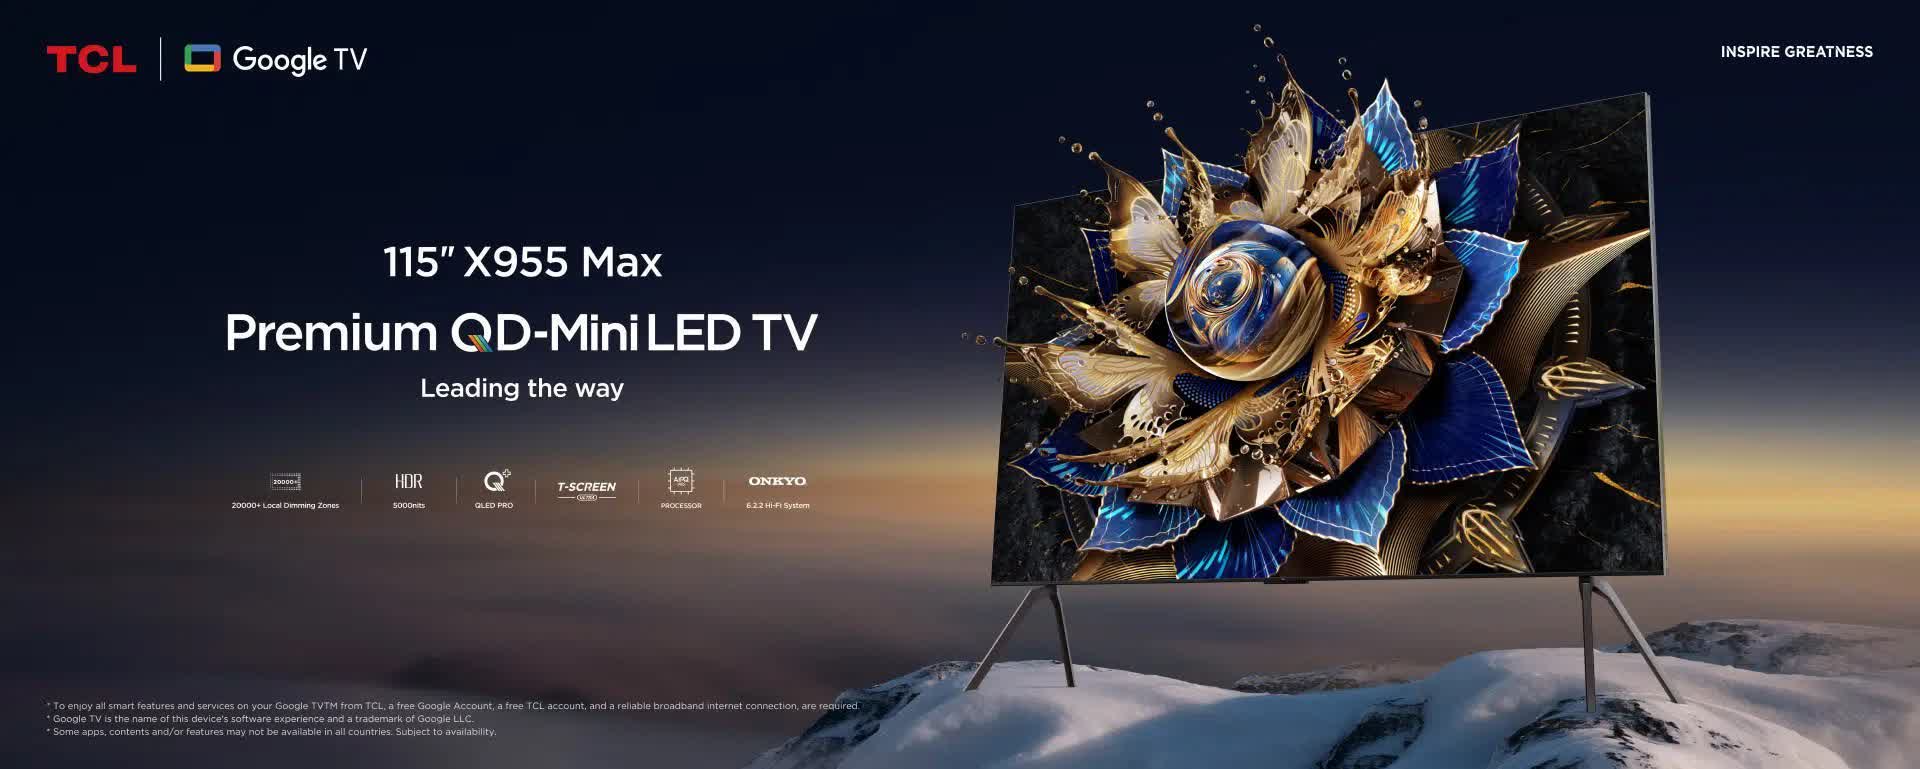 TCL is soon launching a 115-inch version of its flagship 4K QD-Mini-LED TV